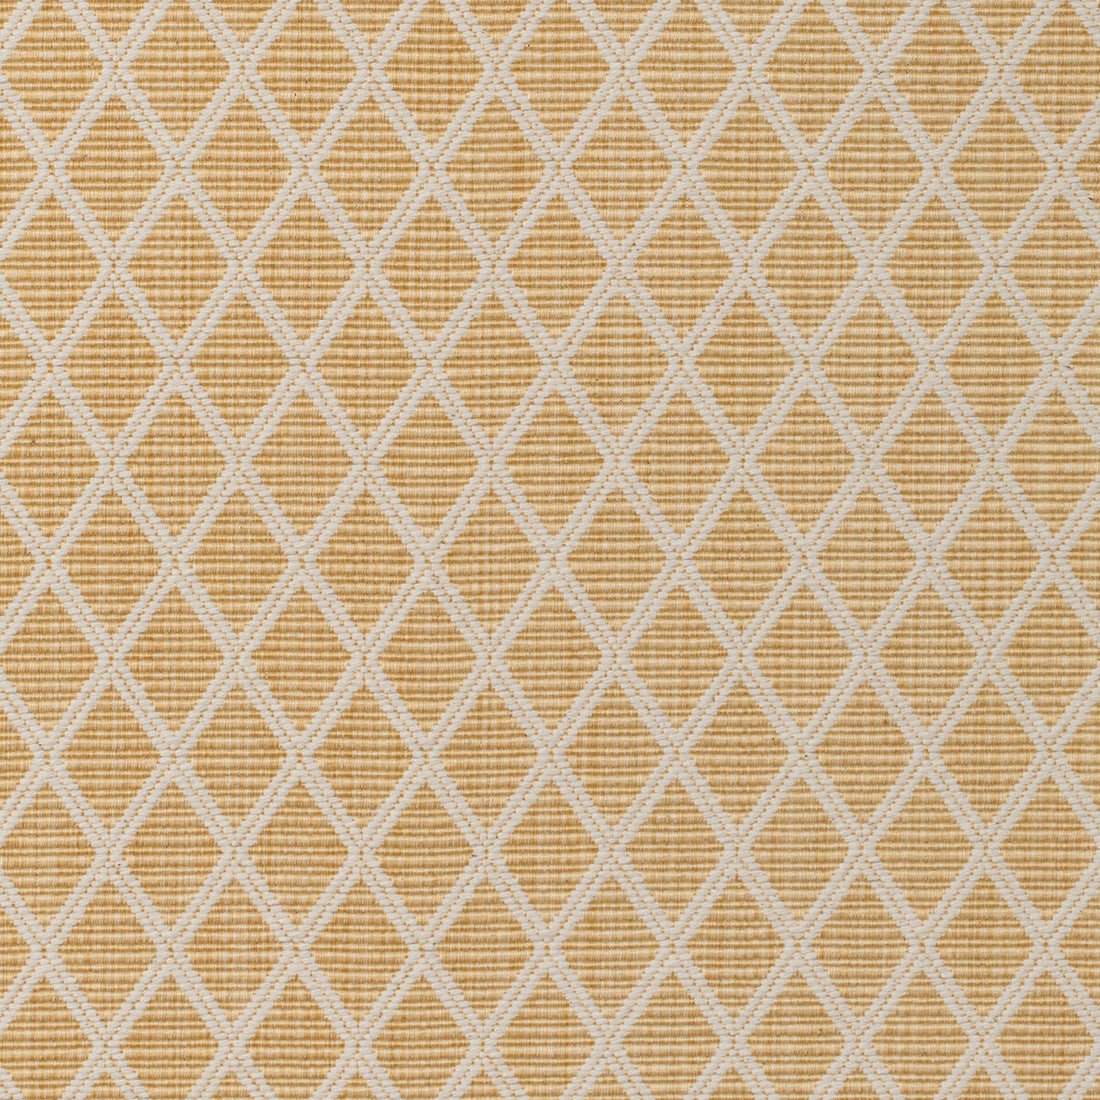 Cancale Woven fabric in canary color - pattern 8020109.4.0 - by Brunschwig &amp; Fils in the Granville Weaves collection